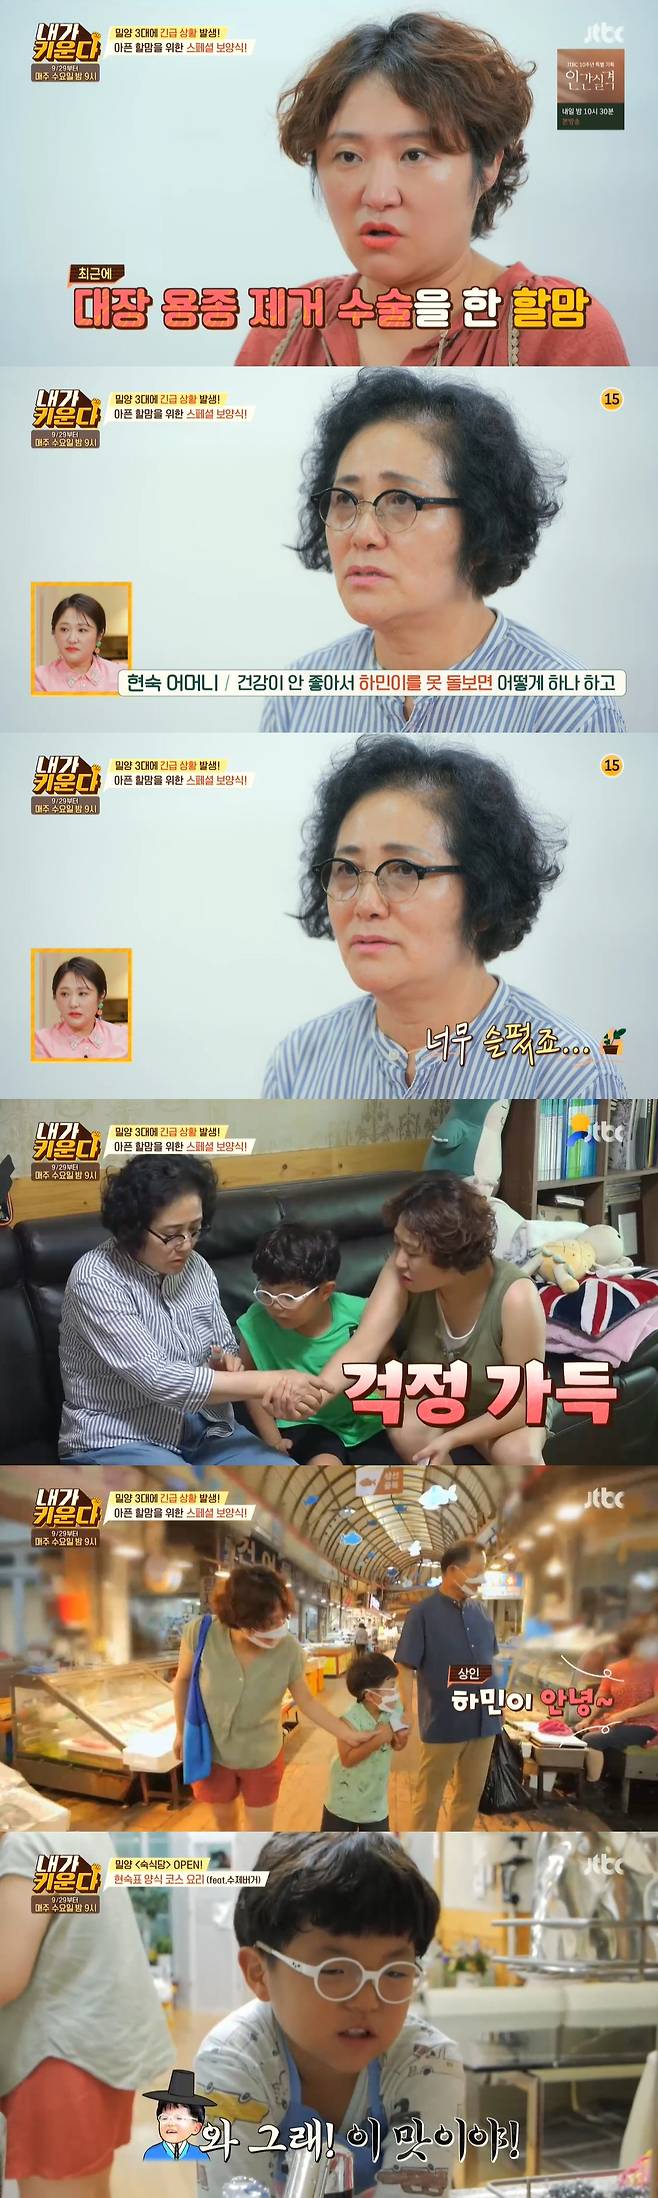 Chae Rim first unveiled 44 months son Minwoo and houseOn the 17th, JTBC entertainment program Brave Solo Parenting - I Raise, solo parenting 4th year Chae Rim released 44 months son Minwoo for the first time.On this day, Chae Rims son Minwoo said, Why are you dressed beautifully? And It is pretty to tie your mothers hair.He was also an English genius who surprised mothers by reading the alphabet from the morning and speaking English freely.Benjamín Vicuña also predicted the birth of a new food star who crossed the seat.In addition, Chae Rims house was the first to be released, and Chae Rims Parenting Warehouse was equipped with all three refrigerators.Jo Yoon-hee also invited Yoon Park and Park Sung-Kwang, who were usually friends, to their home.On this day, Yoon Park shot Roars taste with a set of Roar-customized princess gifts, and he also transformed Roar into a prince with a crown and cape prepared by hand.Park Sung-Kwang appeared in a dinosaur doll for Roar, who likes dinosaurs, but the genre changed rapidly with a horror movie in a threatening visual.At that time, Roar said, You only do housework. He immediately went into the situation drama and embarrassed Yoon Park and Park Sung-Kwang.When the pair were adjusting to parenting mode, Roar laughed at Yoon Park with a confident step into the time of Prince Choices of Prince Kobshoo and Prince Konkoo Park Sung-Kwang.Park Sung-Kwang brought out a gift prepared to capture Roars heart, but Roar shouted, I like this more.Jo Yoon-hee then convinced him to just watch but Roar was left baffled by tears in frustration that he would ask to change his princess clothes.Afterwards, Yoon Park and Park Sung-Kwang opened Princeland and spent time with Roar in a mixed situation.Then the time of the second Prince Choices, Roar made Park Sung-Kwang laugh at Choices and Park Sung-Kwang.Kim Na-young enjoyed camping, enjoying Sooyoung at Shin-Urayasu Station, Lee Joon and the Valley.Kim Na-young, including Brother Shin-Urayasu Station X Lee Joon, who is equipped with the latest water-playing items, has embarrassed all performers with his unconventional valley fashion wearing a one-piece Sooyoung suit.Kim Na-young held Lee Joon, who was afraid of water, and then Shin-Urayasu Station showed three-stage integration Sooyoung saying I am out of my mothers back.After the watering, Kim Na-young spent time healing while the children were cycling while preparing for dinner.Kim Na-young prepared a hot ribs and the children who were hungry with the water were stimulated by the taste of viewers with a special meat food.Shin-Urayasu Station and Lee Joon laughed at the dance dance in line with the BTS song.Kim Na-young said, I think I dreamed, but Its not hard to drive long distances. I think I get more strength when I go to Camping.Kim Hyun-Sook and Benjamín Vicuñai have set out to prepare a special recreational ceremony for the palatable Grandmas Boy.Kim Hyun-Sook said, My mother had a colonoscopy, and I found a polyp, and I had surgery because I needed surgery.Kim Hyun-Sooks mother said, We want Benjamín Vicuña to be healthy until I go to middle and high school. I was so sad if I could not take care of Benjamín Vicuña because I was not healthy.Kim Hyun-Sook and Benjamín Vicuña looked directly at the chapter and prepared a meal for Grandmas Boy.But a short time later, Benjamín Vicuña was annoyed by Grandmas Boy when he saw the toys broken, and Kim Hyun-Sook, who watched it, eventually became angry and loud.Kim Hyun-Sook pointed out the key to Benjamín Vicuñai correctly, and Benjamín Vicuñai burst into tears at the image of his determined mother.Kim Hyun-Sook said, Grandmas Boy, you should not be irritated that your grandfather is good.Grandmas Boy, I do not want to do it to my grandfather. After the incident, Benjamín Vicuña read his mind.Benjamín Vicuñai put it in Grandmas Boy arms and said, I hate my mother, and Grandmas Boy delivered her mothers heart, saying, I am the mother who loves Benjamín Vicuña in this world.Kim Hyun-Sook then served the food prepared directly from beef porridge to pasta salad and homemade hamburger, and finished the pleasant day with family all delicious.